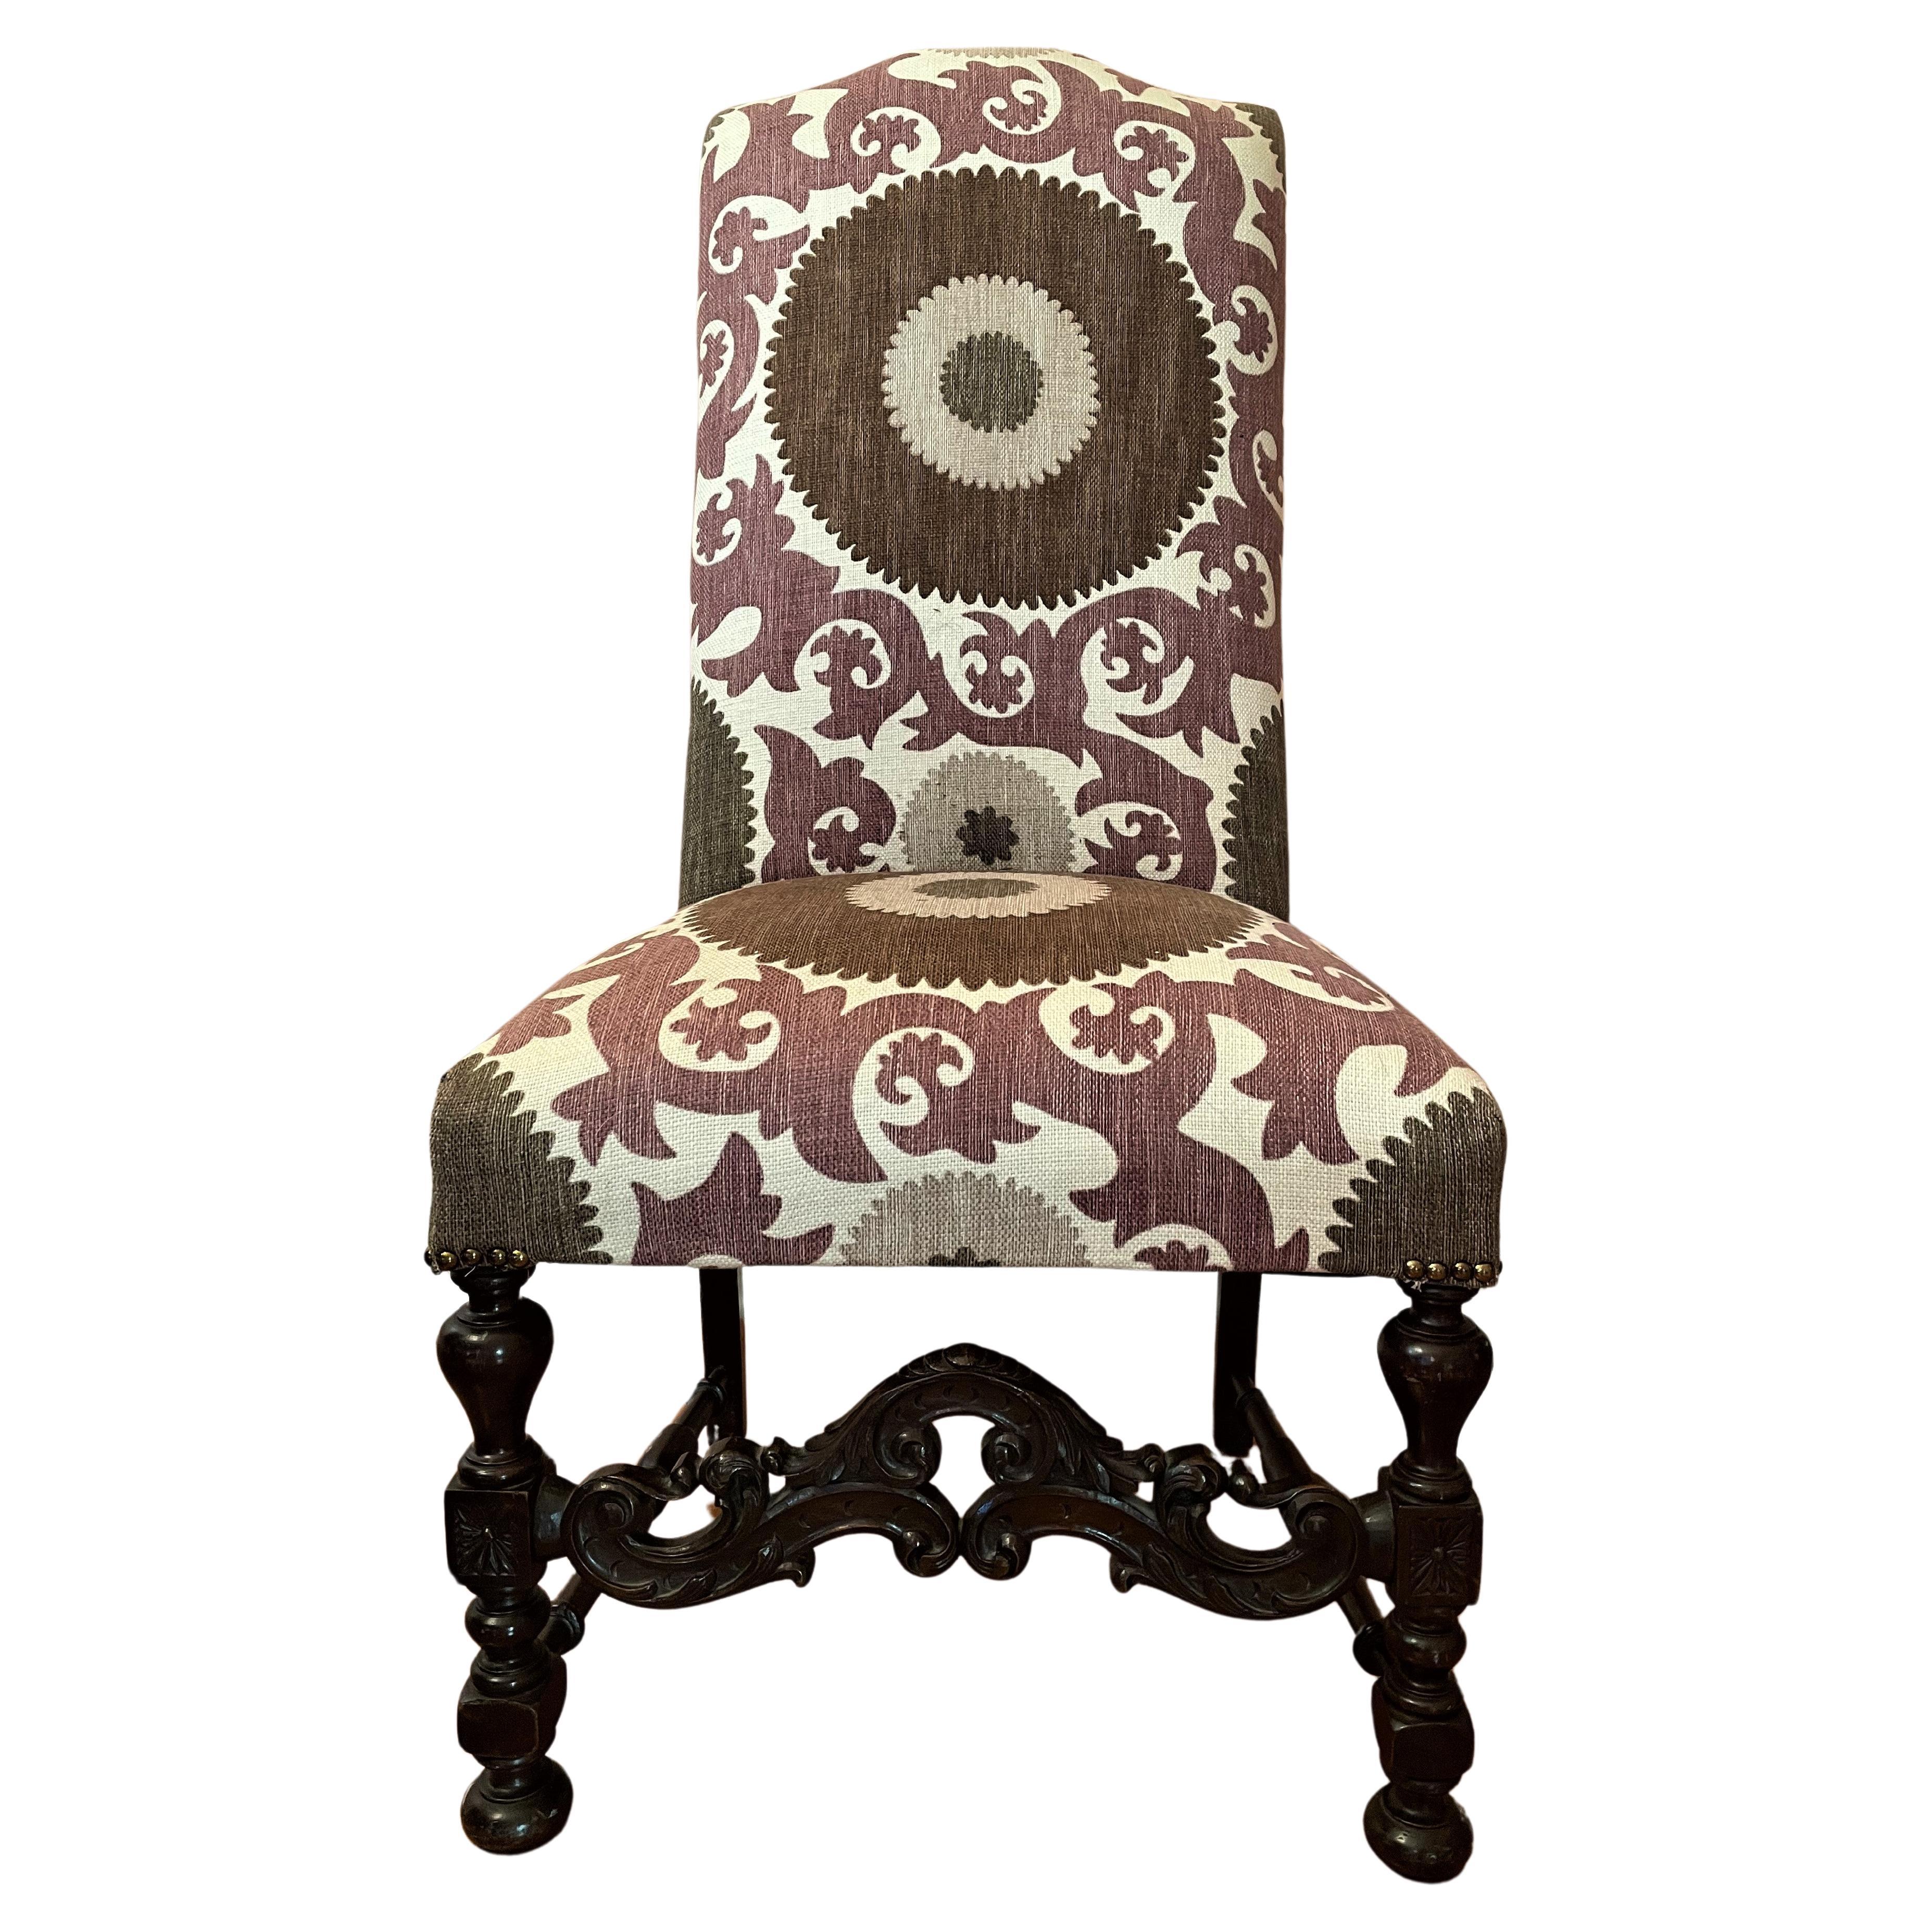 1940s Santa Barbara-Style Side Chair in Lavender, Taupe, Brown with Walnut Frame For Sale